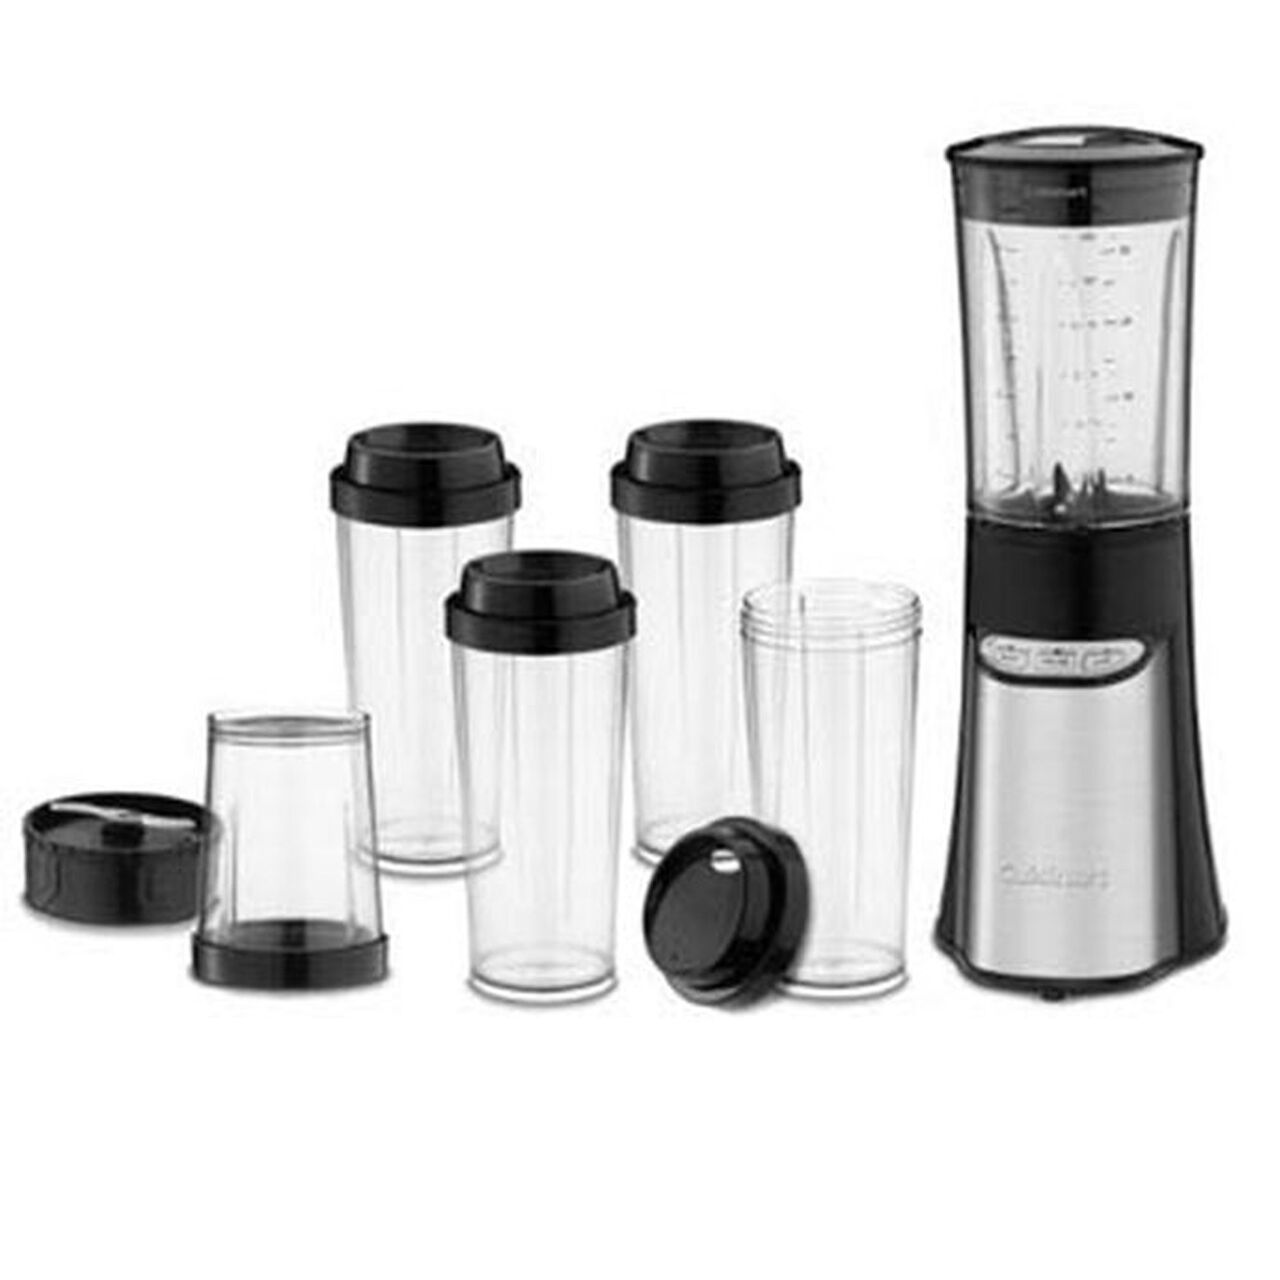 Cuisinart #CPB-300 15pc Compact Portable Blending/Chopping System, , large image number 0